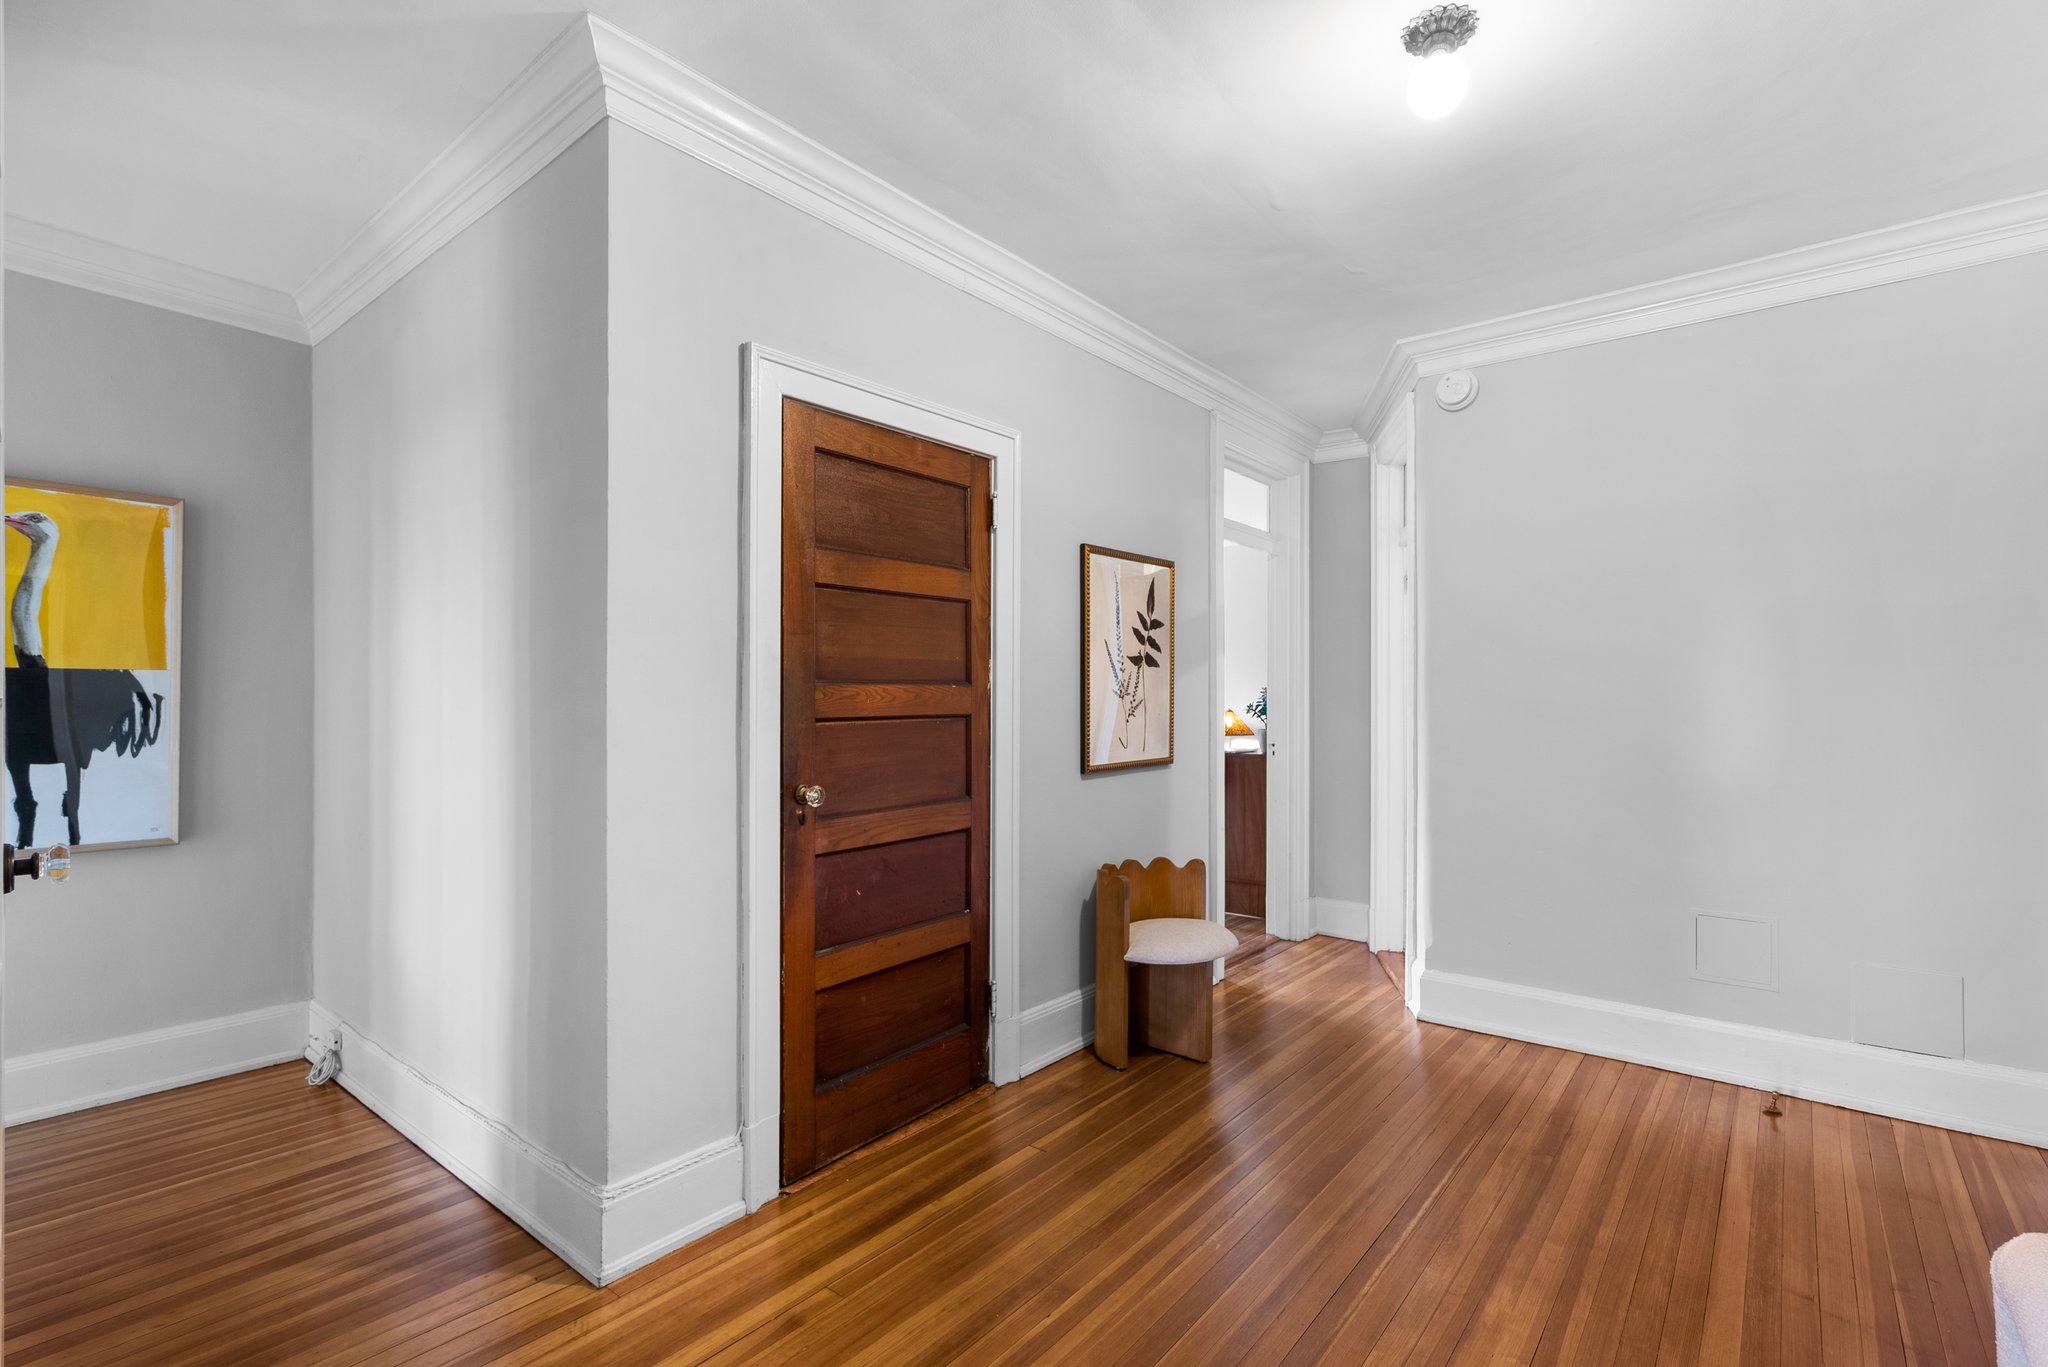 9' ceilings & crown molding throughout